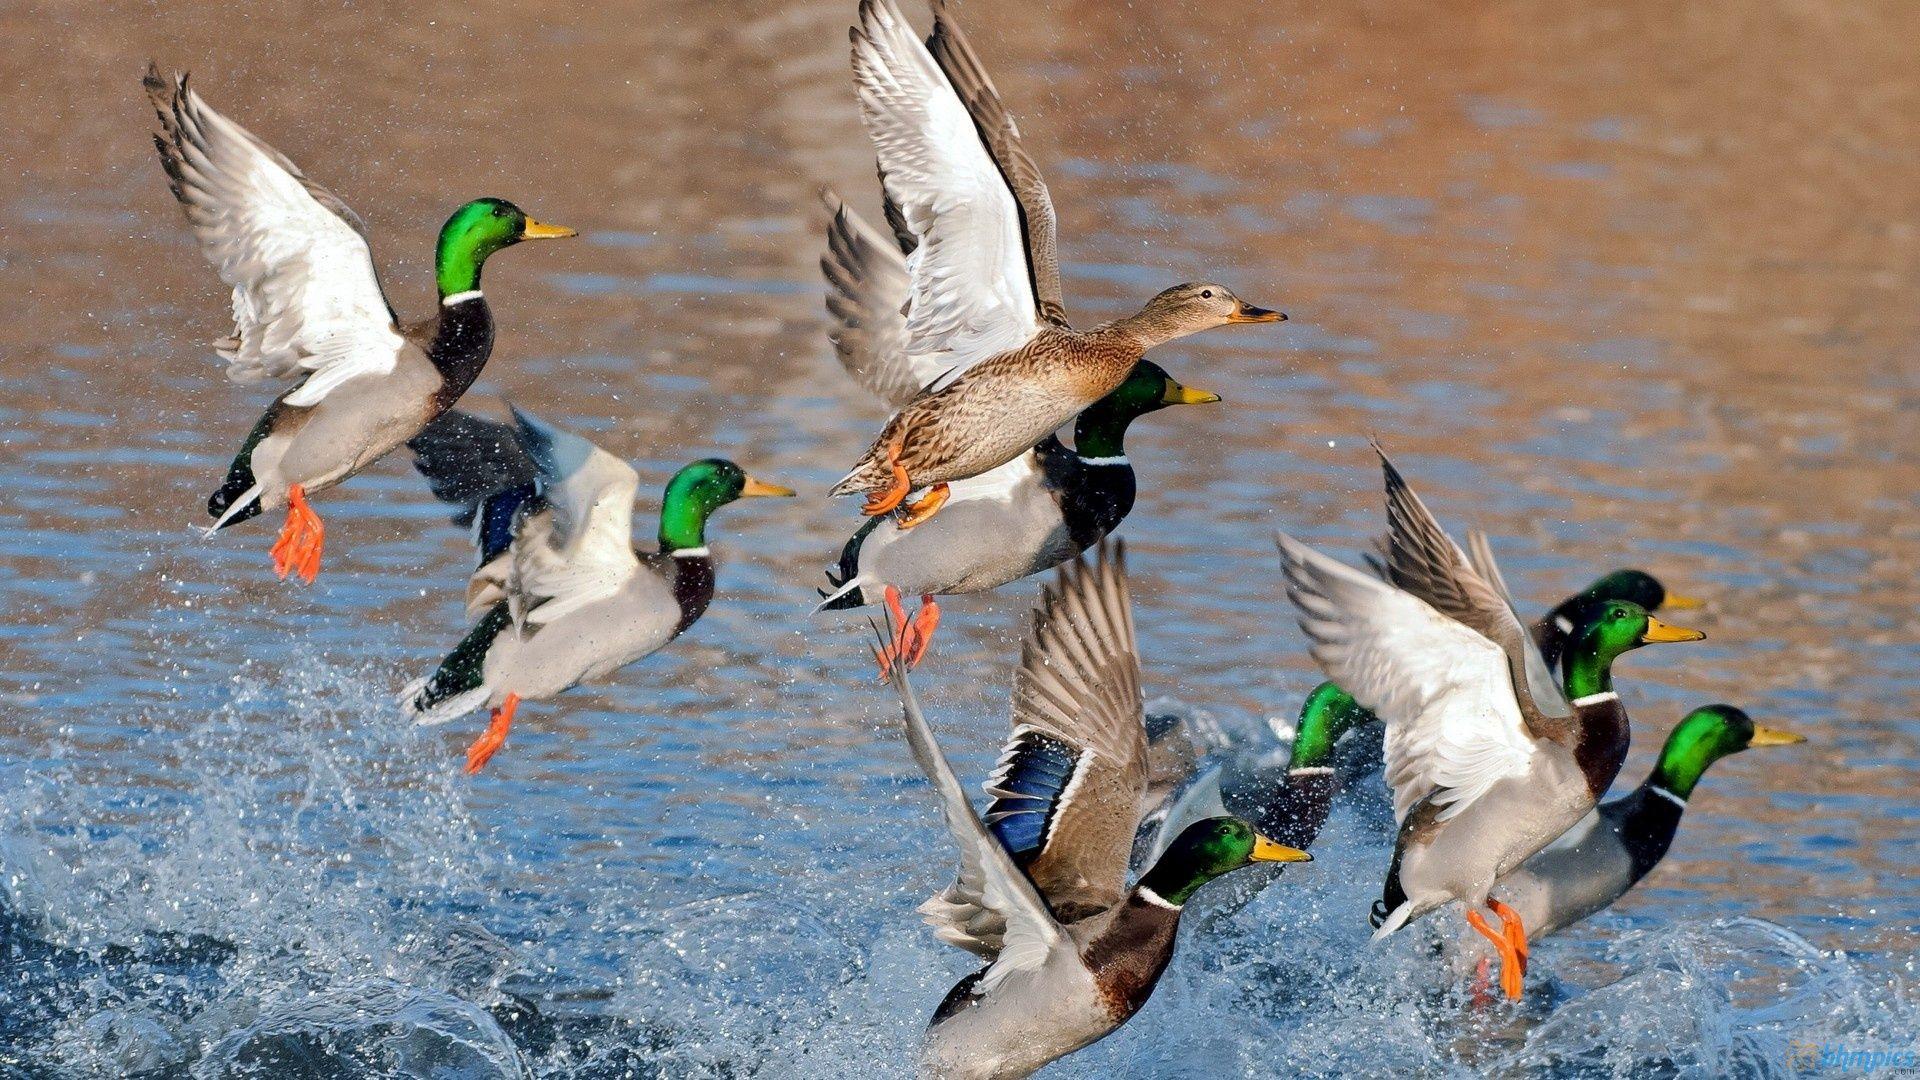 Duck Hunting Wallpaper Free Download